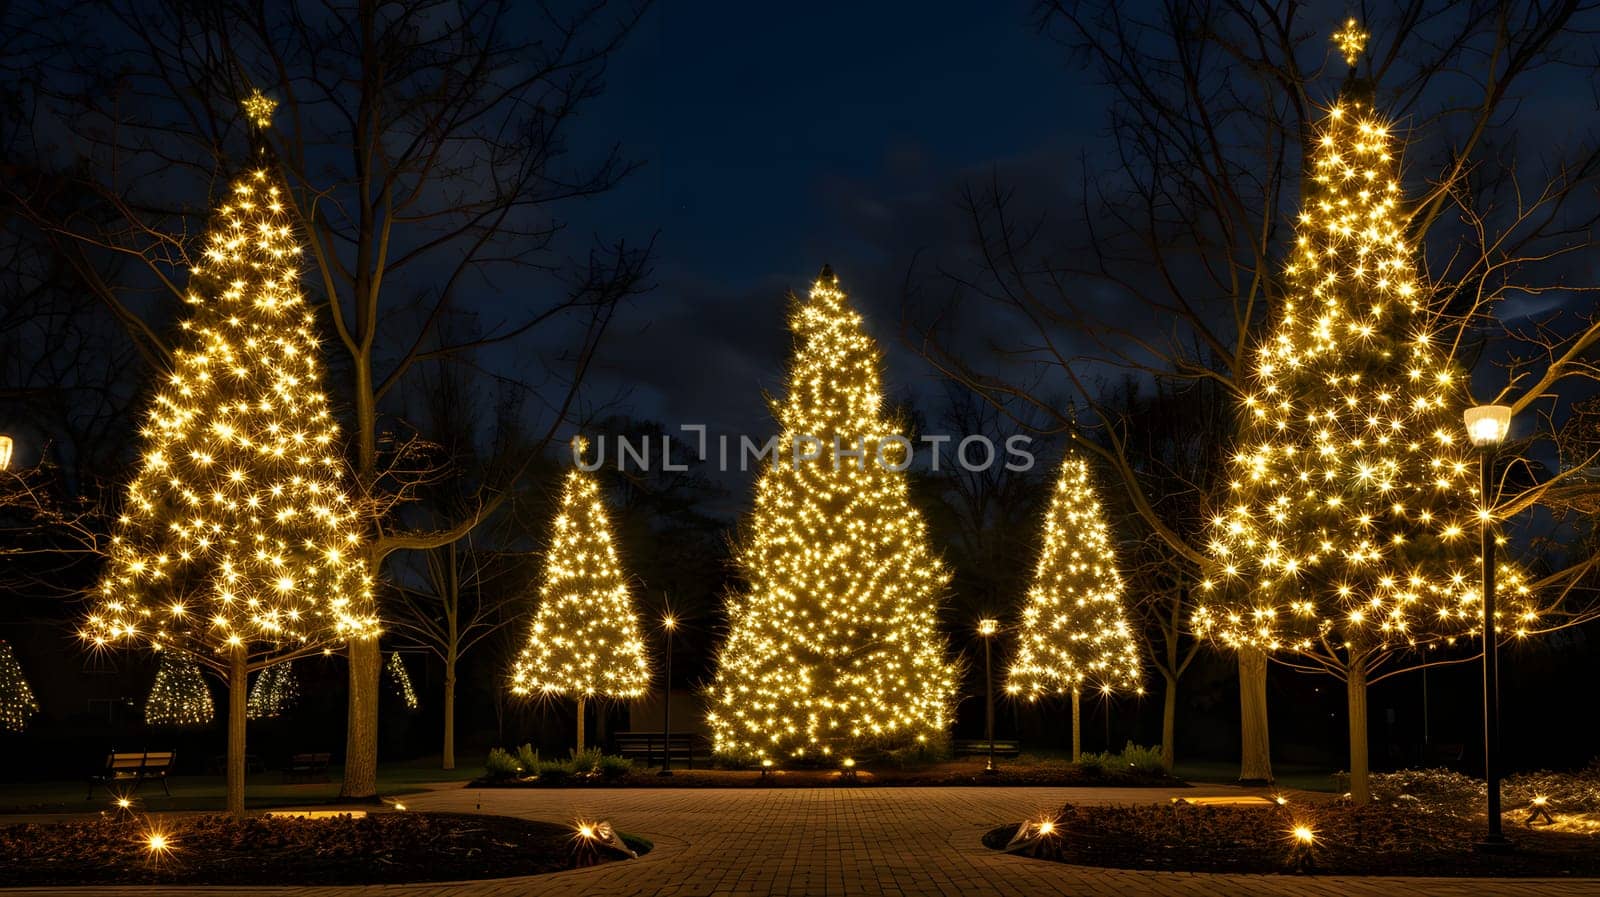 Row of Christmas trees aglow against the night sky by Nadtochiy